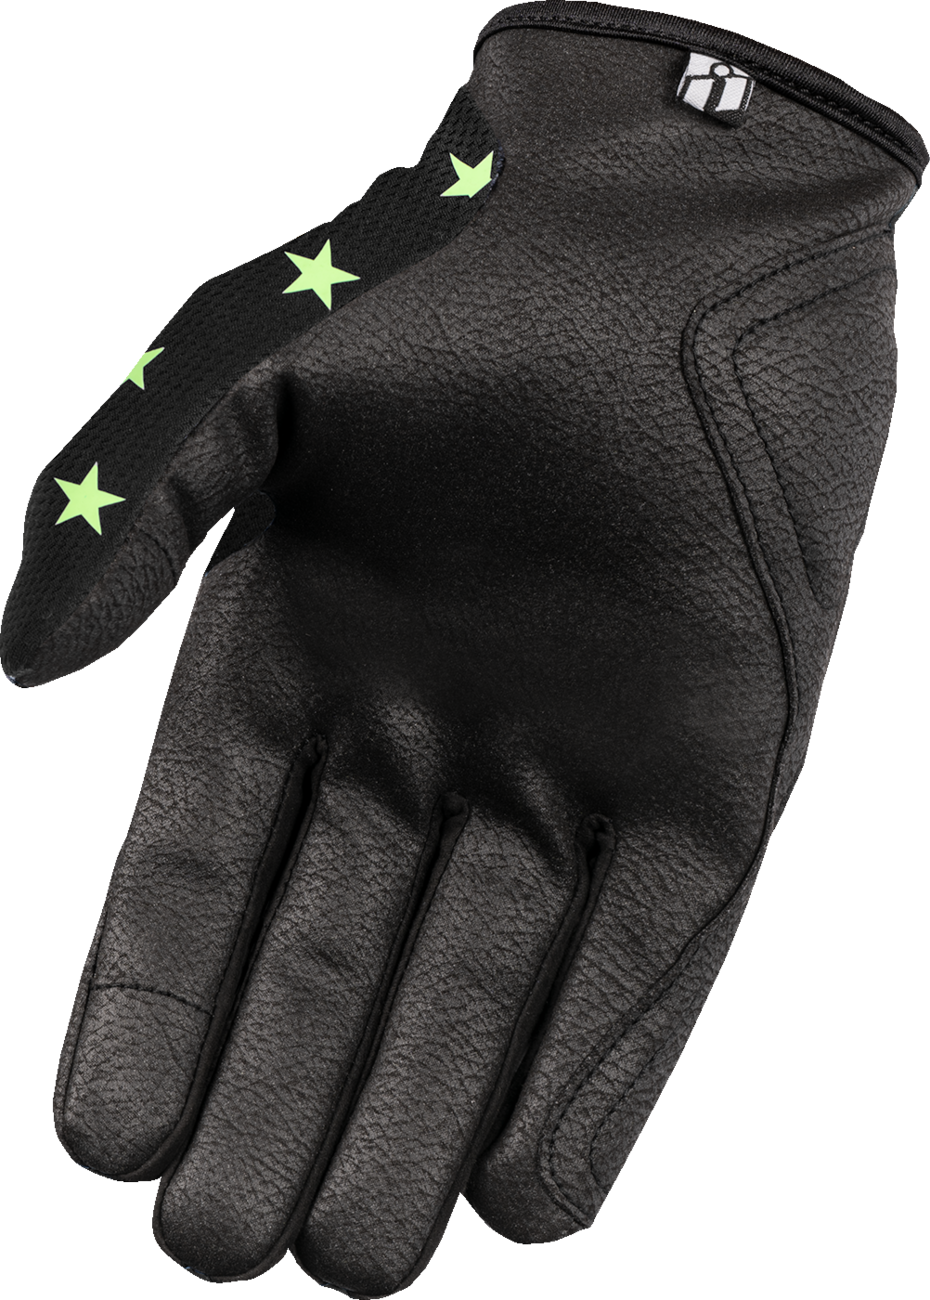 ICON Hooligan™ Old Glory Gloves - Glow - Small 3301-4692